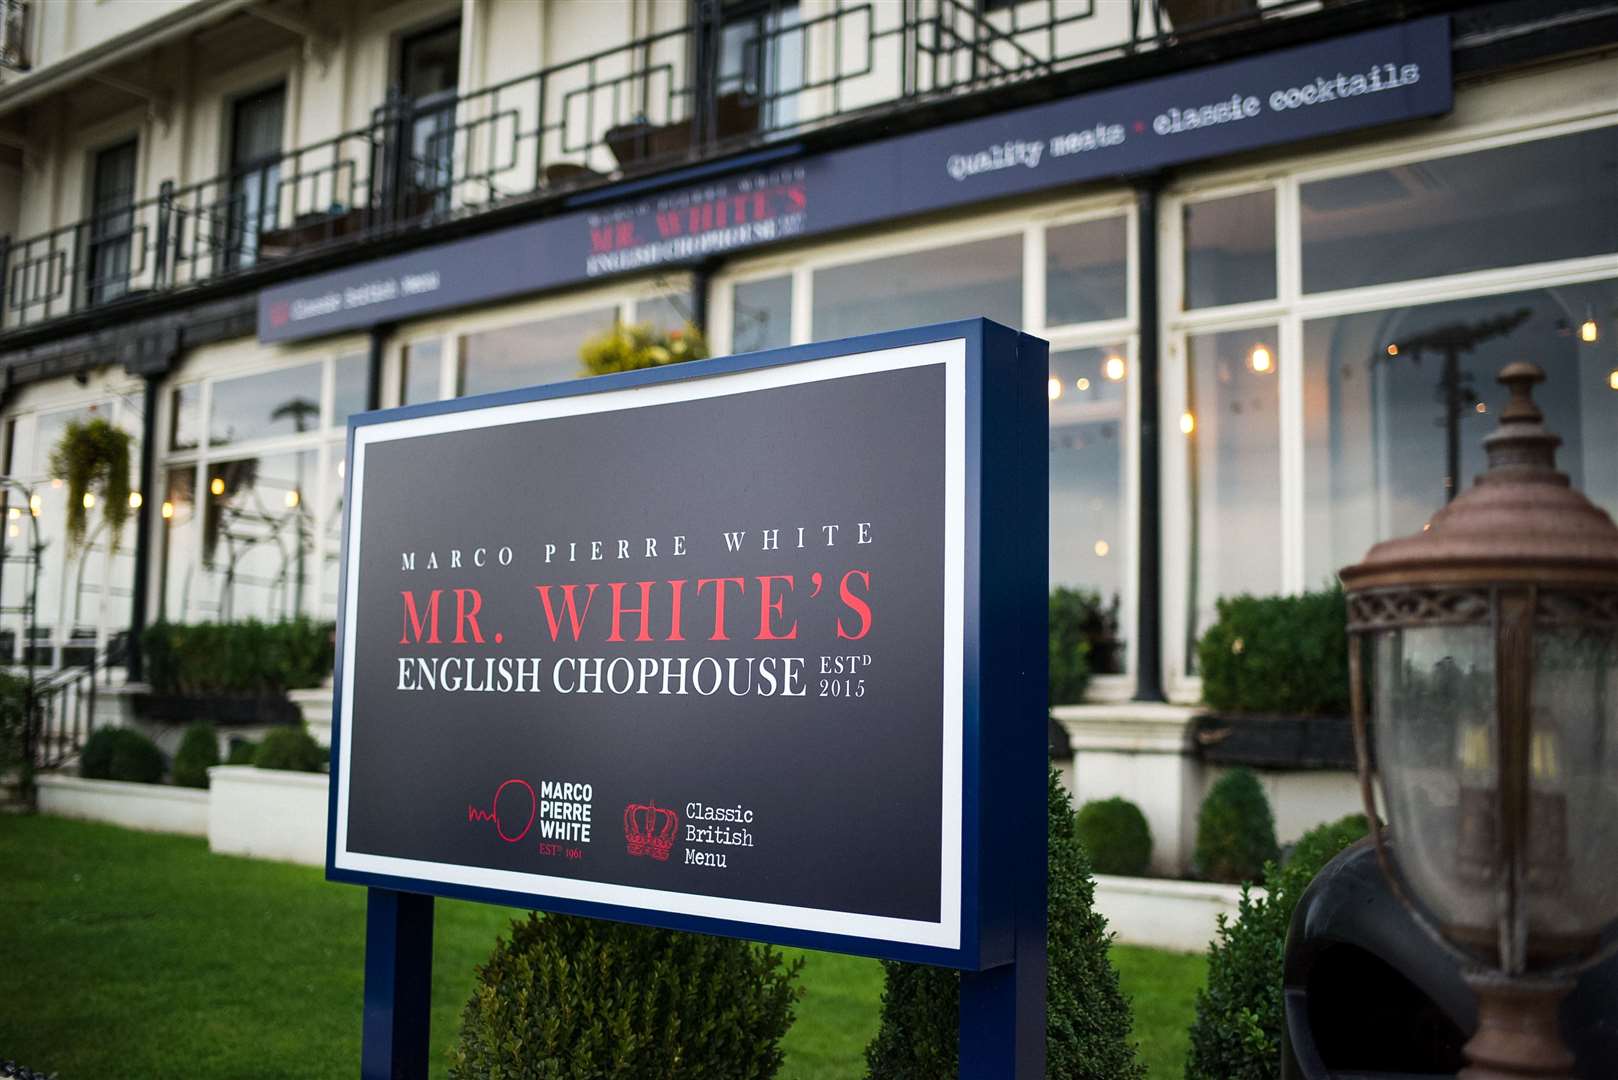 Mr White’s English Chophouse is opening its doors again